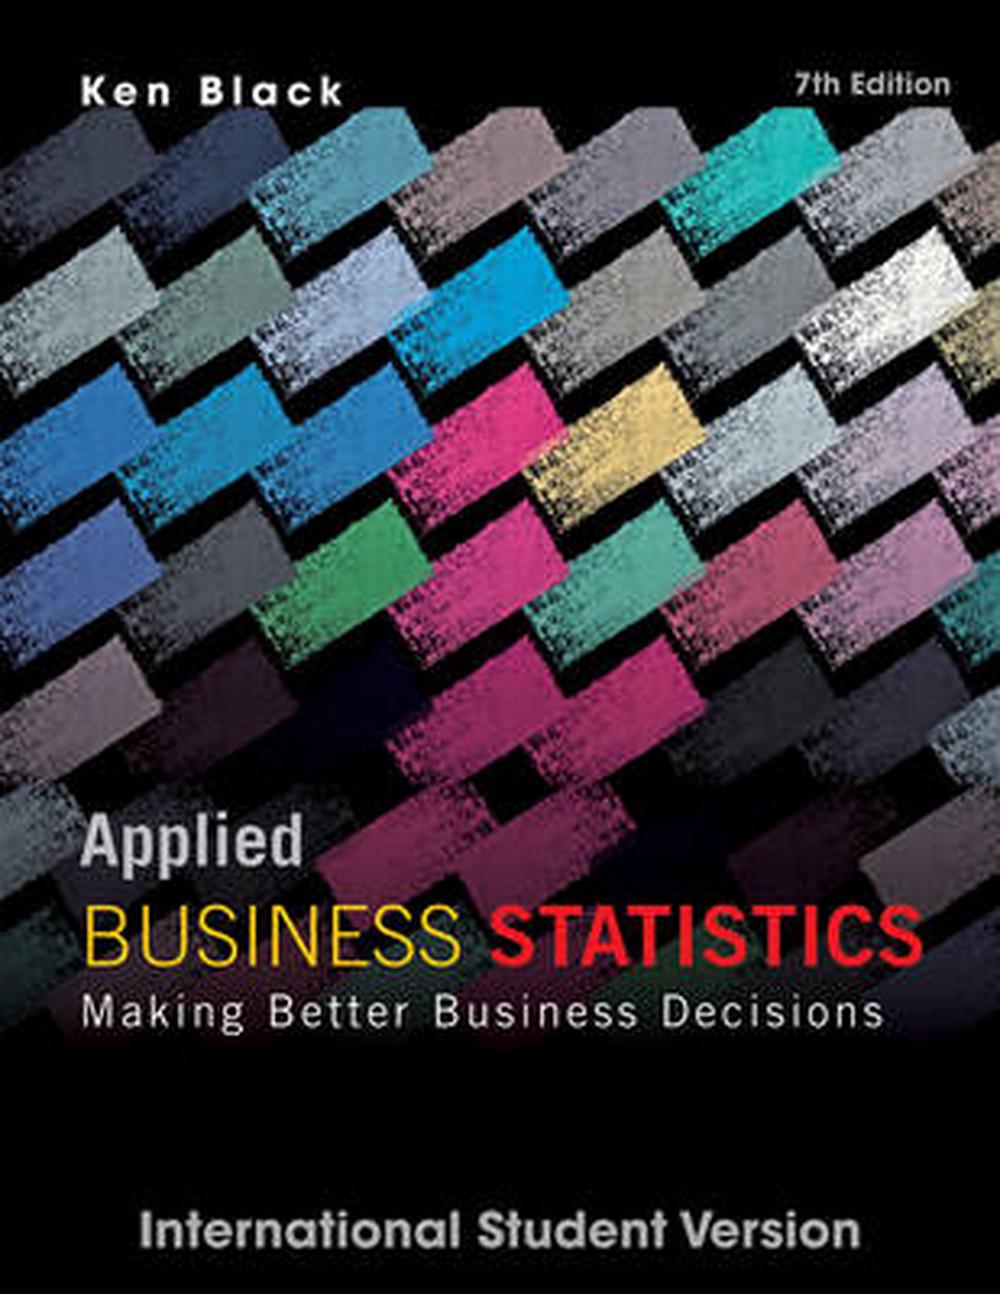 Applied Business Statistics Making Better Business Decisions by Ken